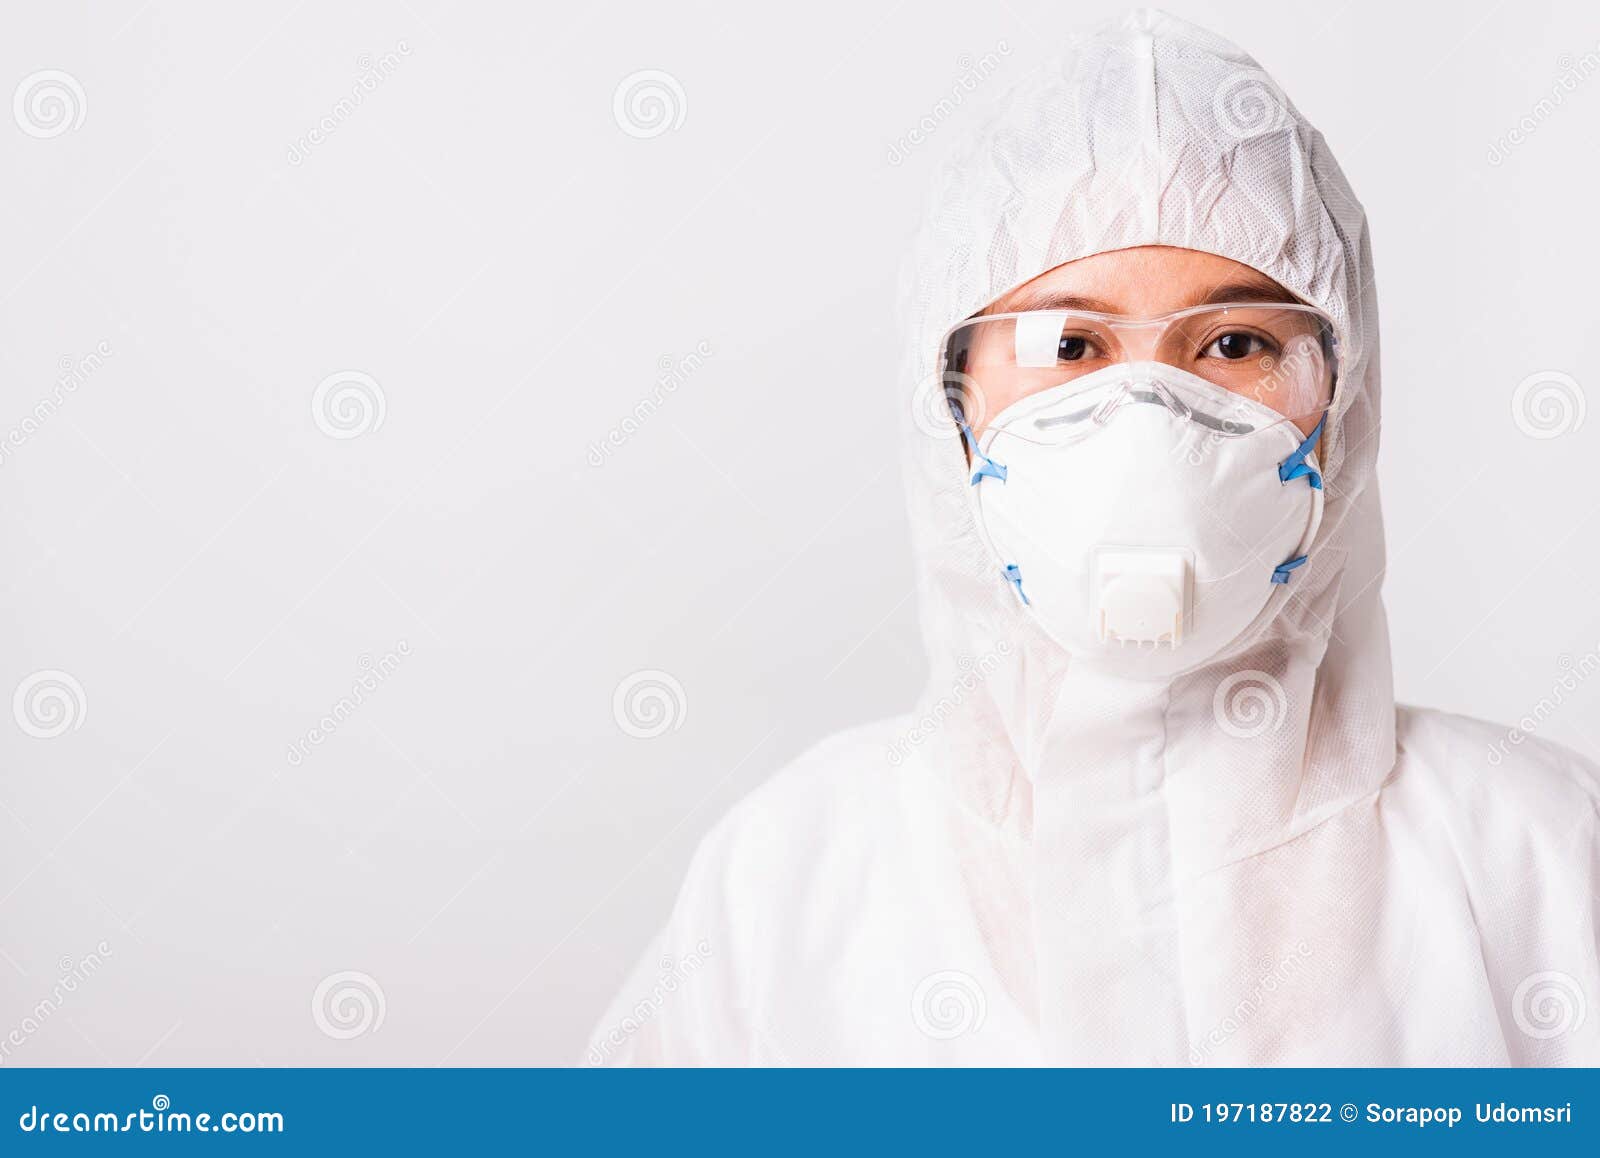 Portrait Woman Doctor or Nurse in PPE Uniform and Gloves Wearing Face ...